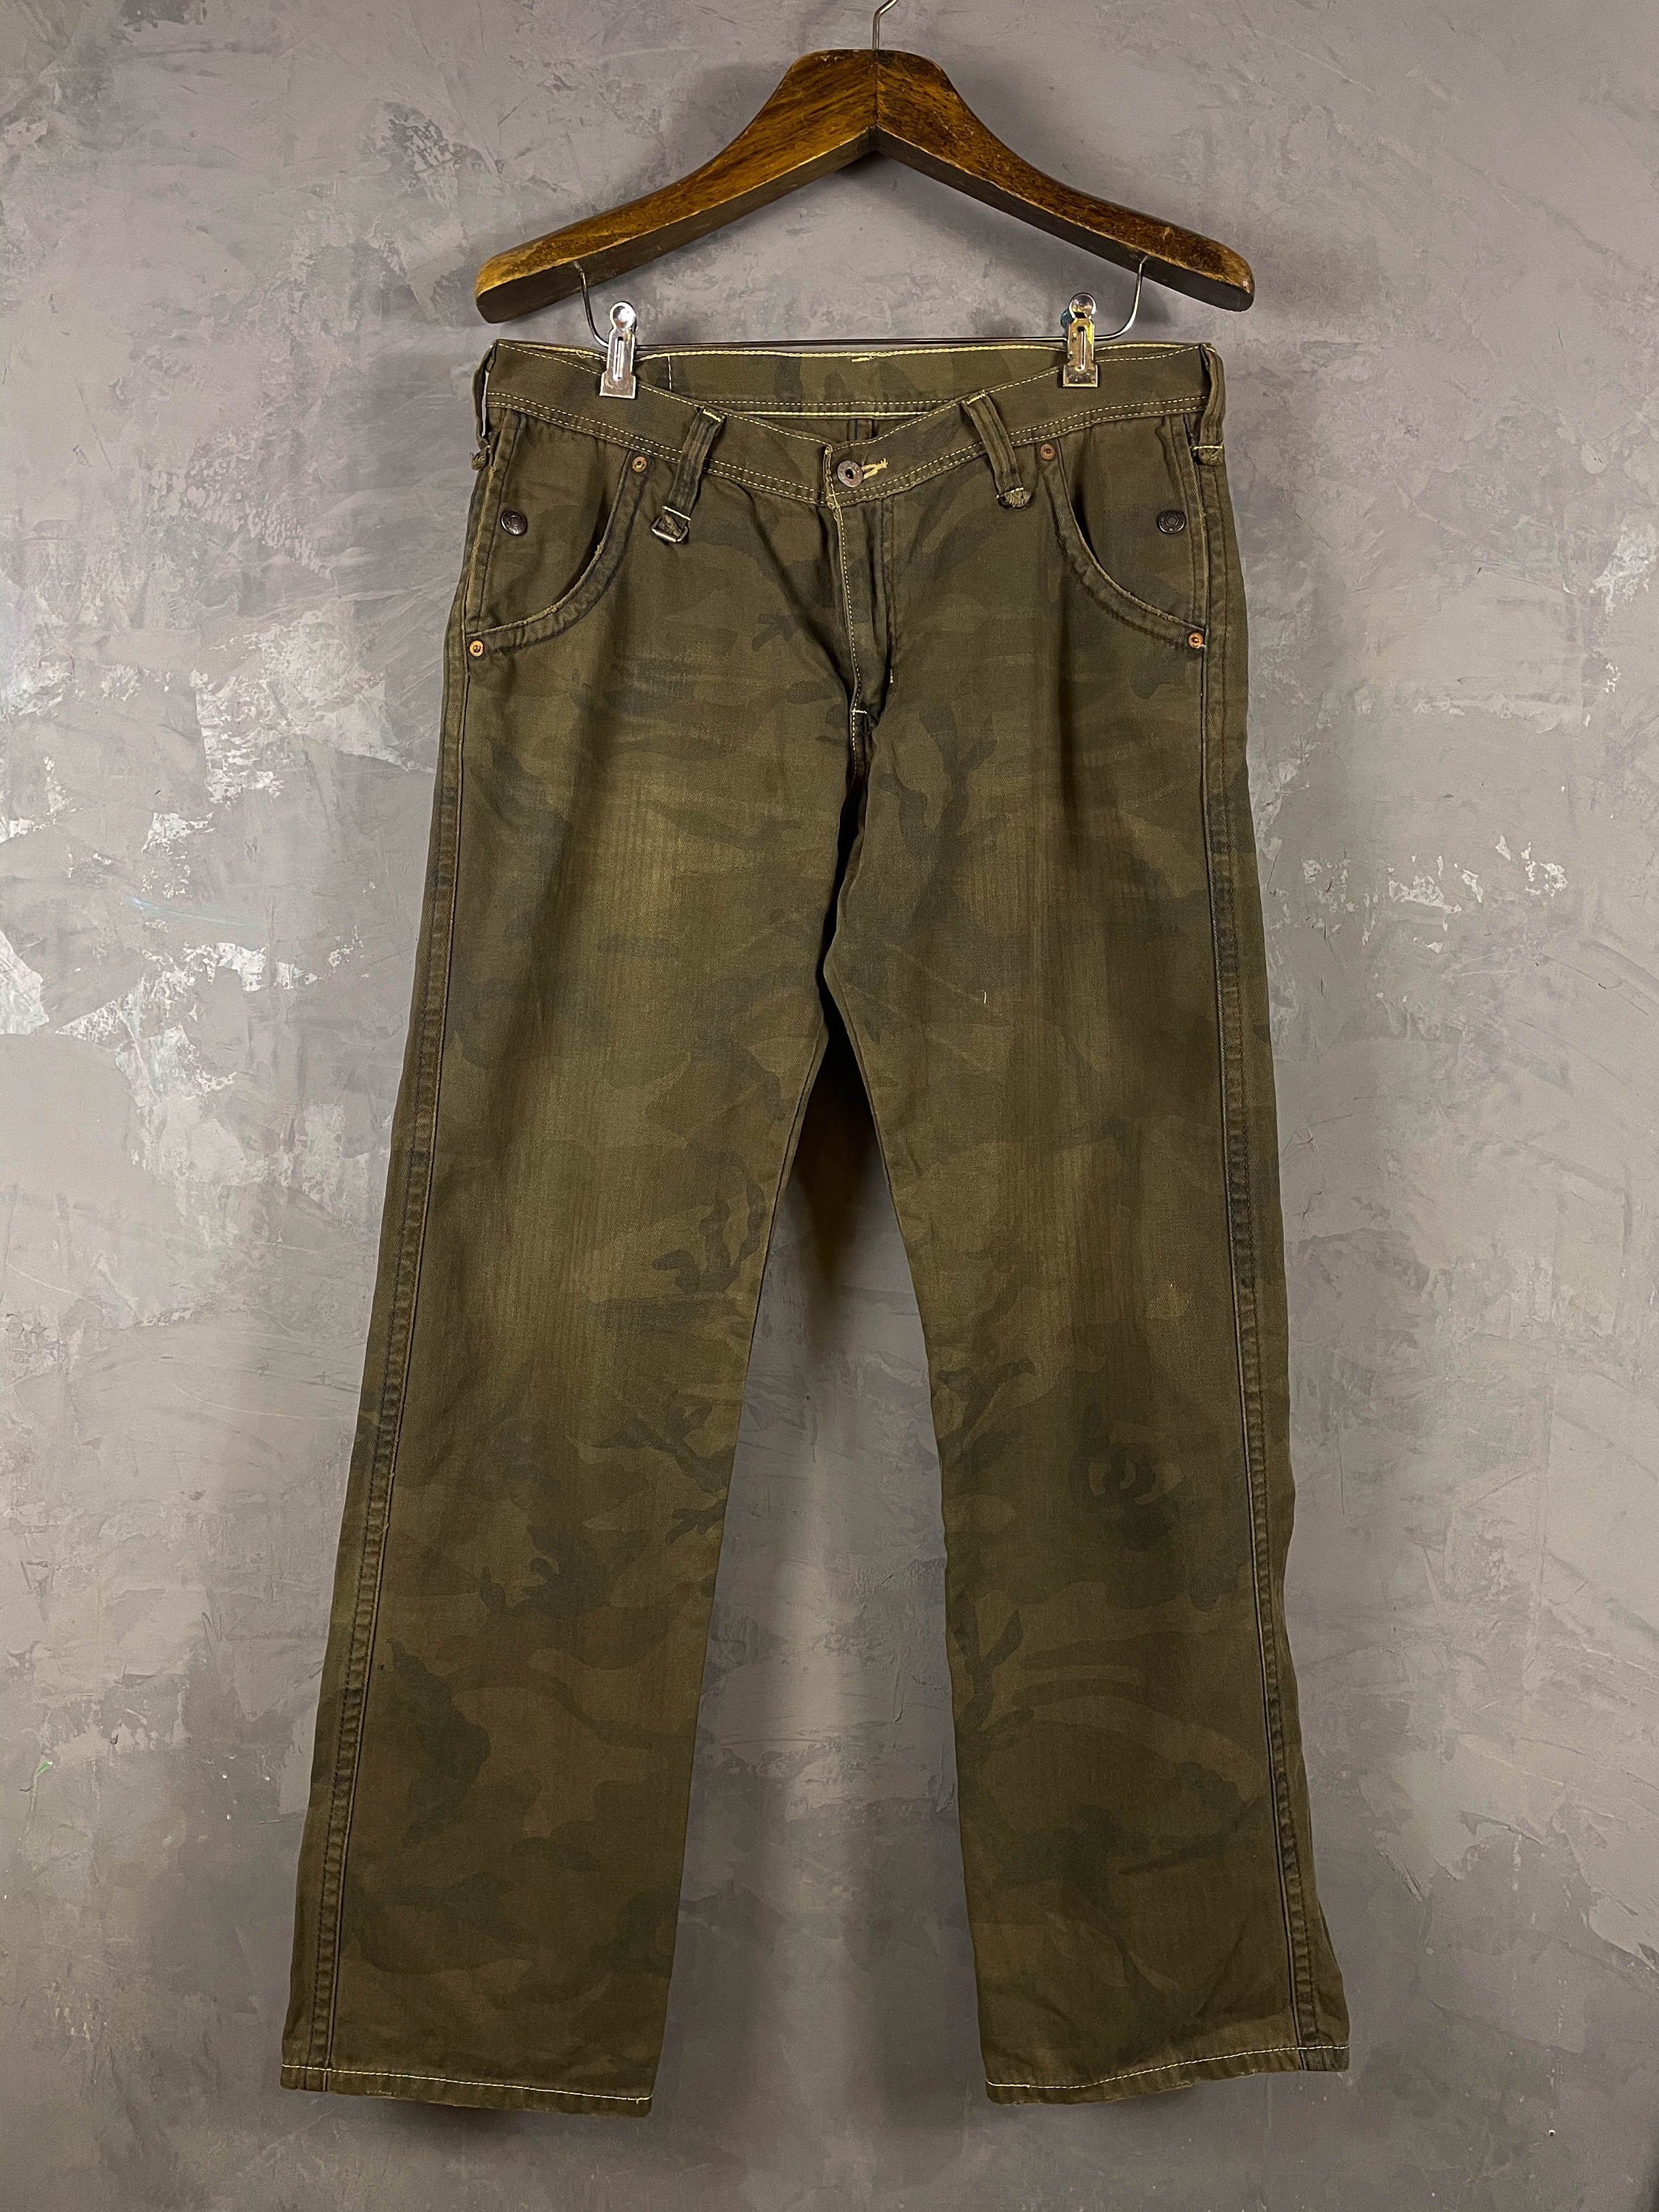 Levi's Camo Denim Pants / Made in Japan /703 - Etsy Canada